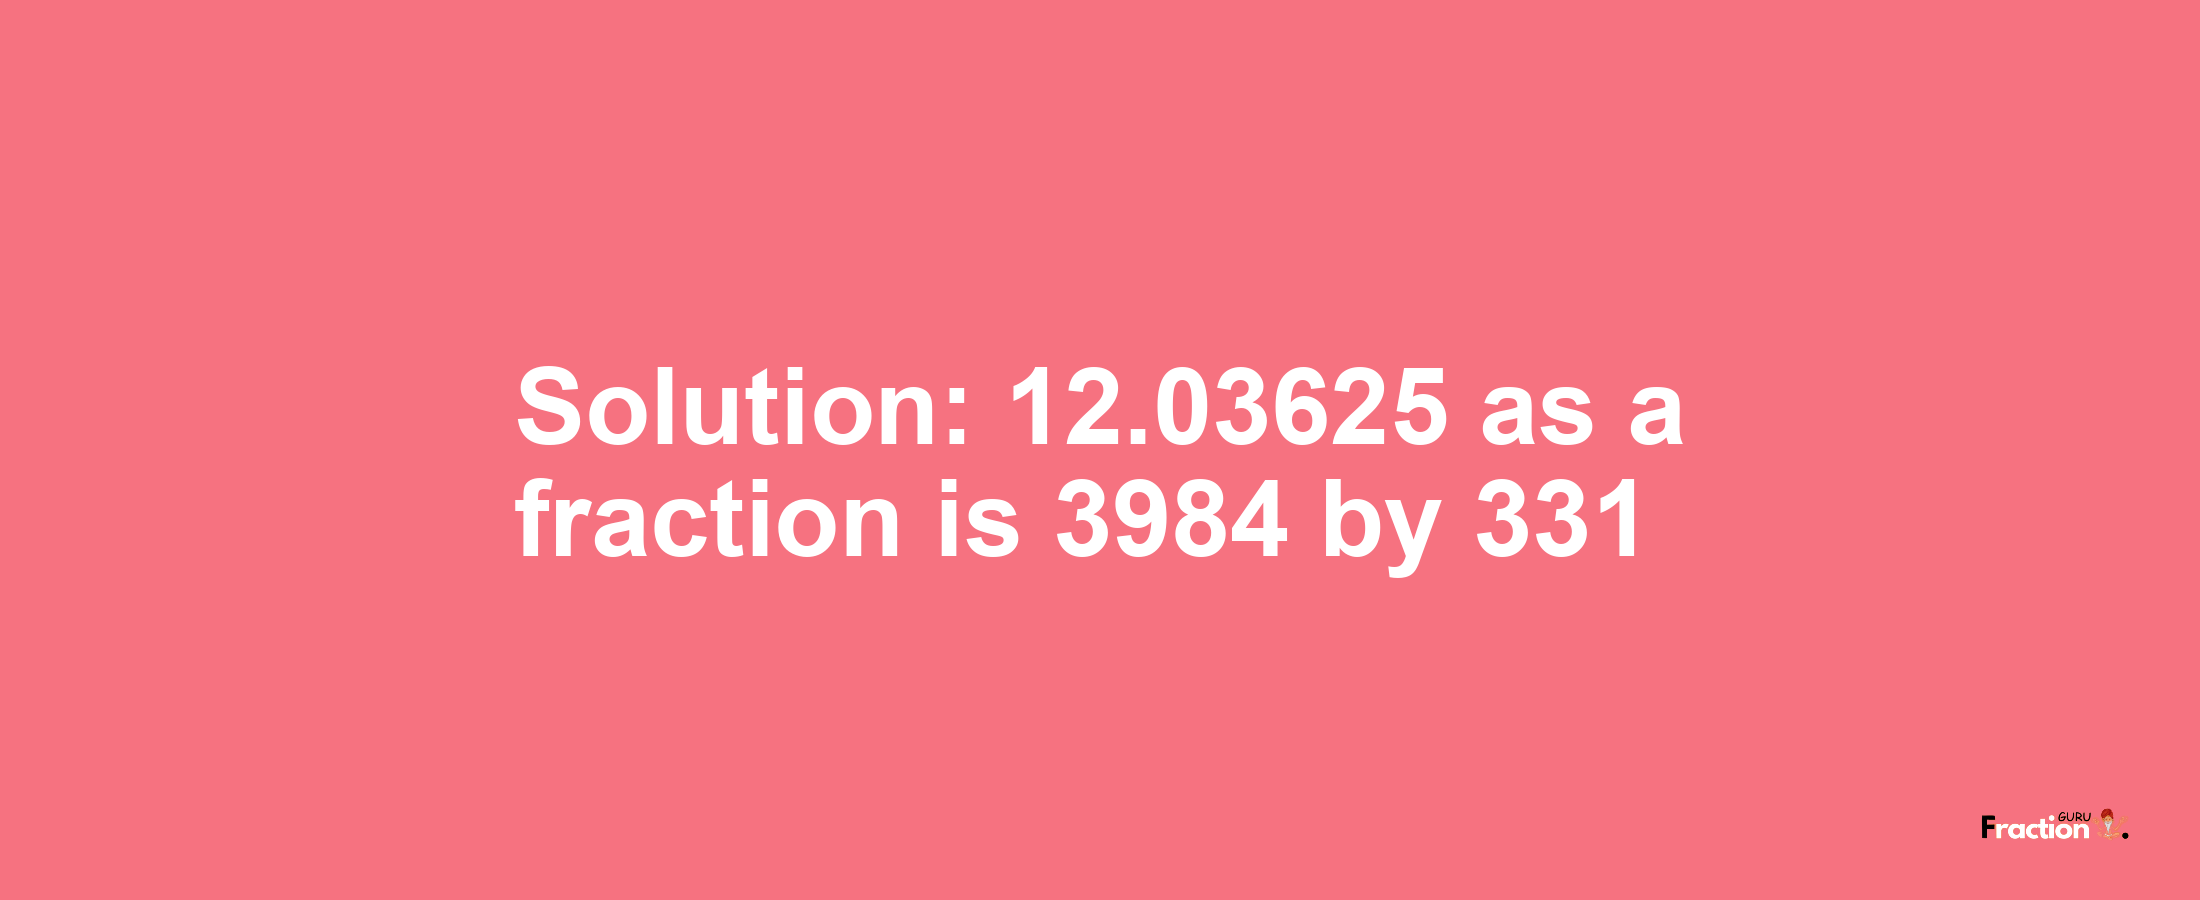 Solution:12.03625 as a fraction is 3984/331